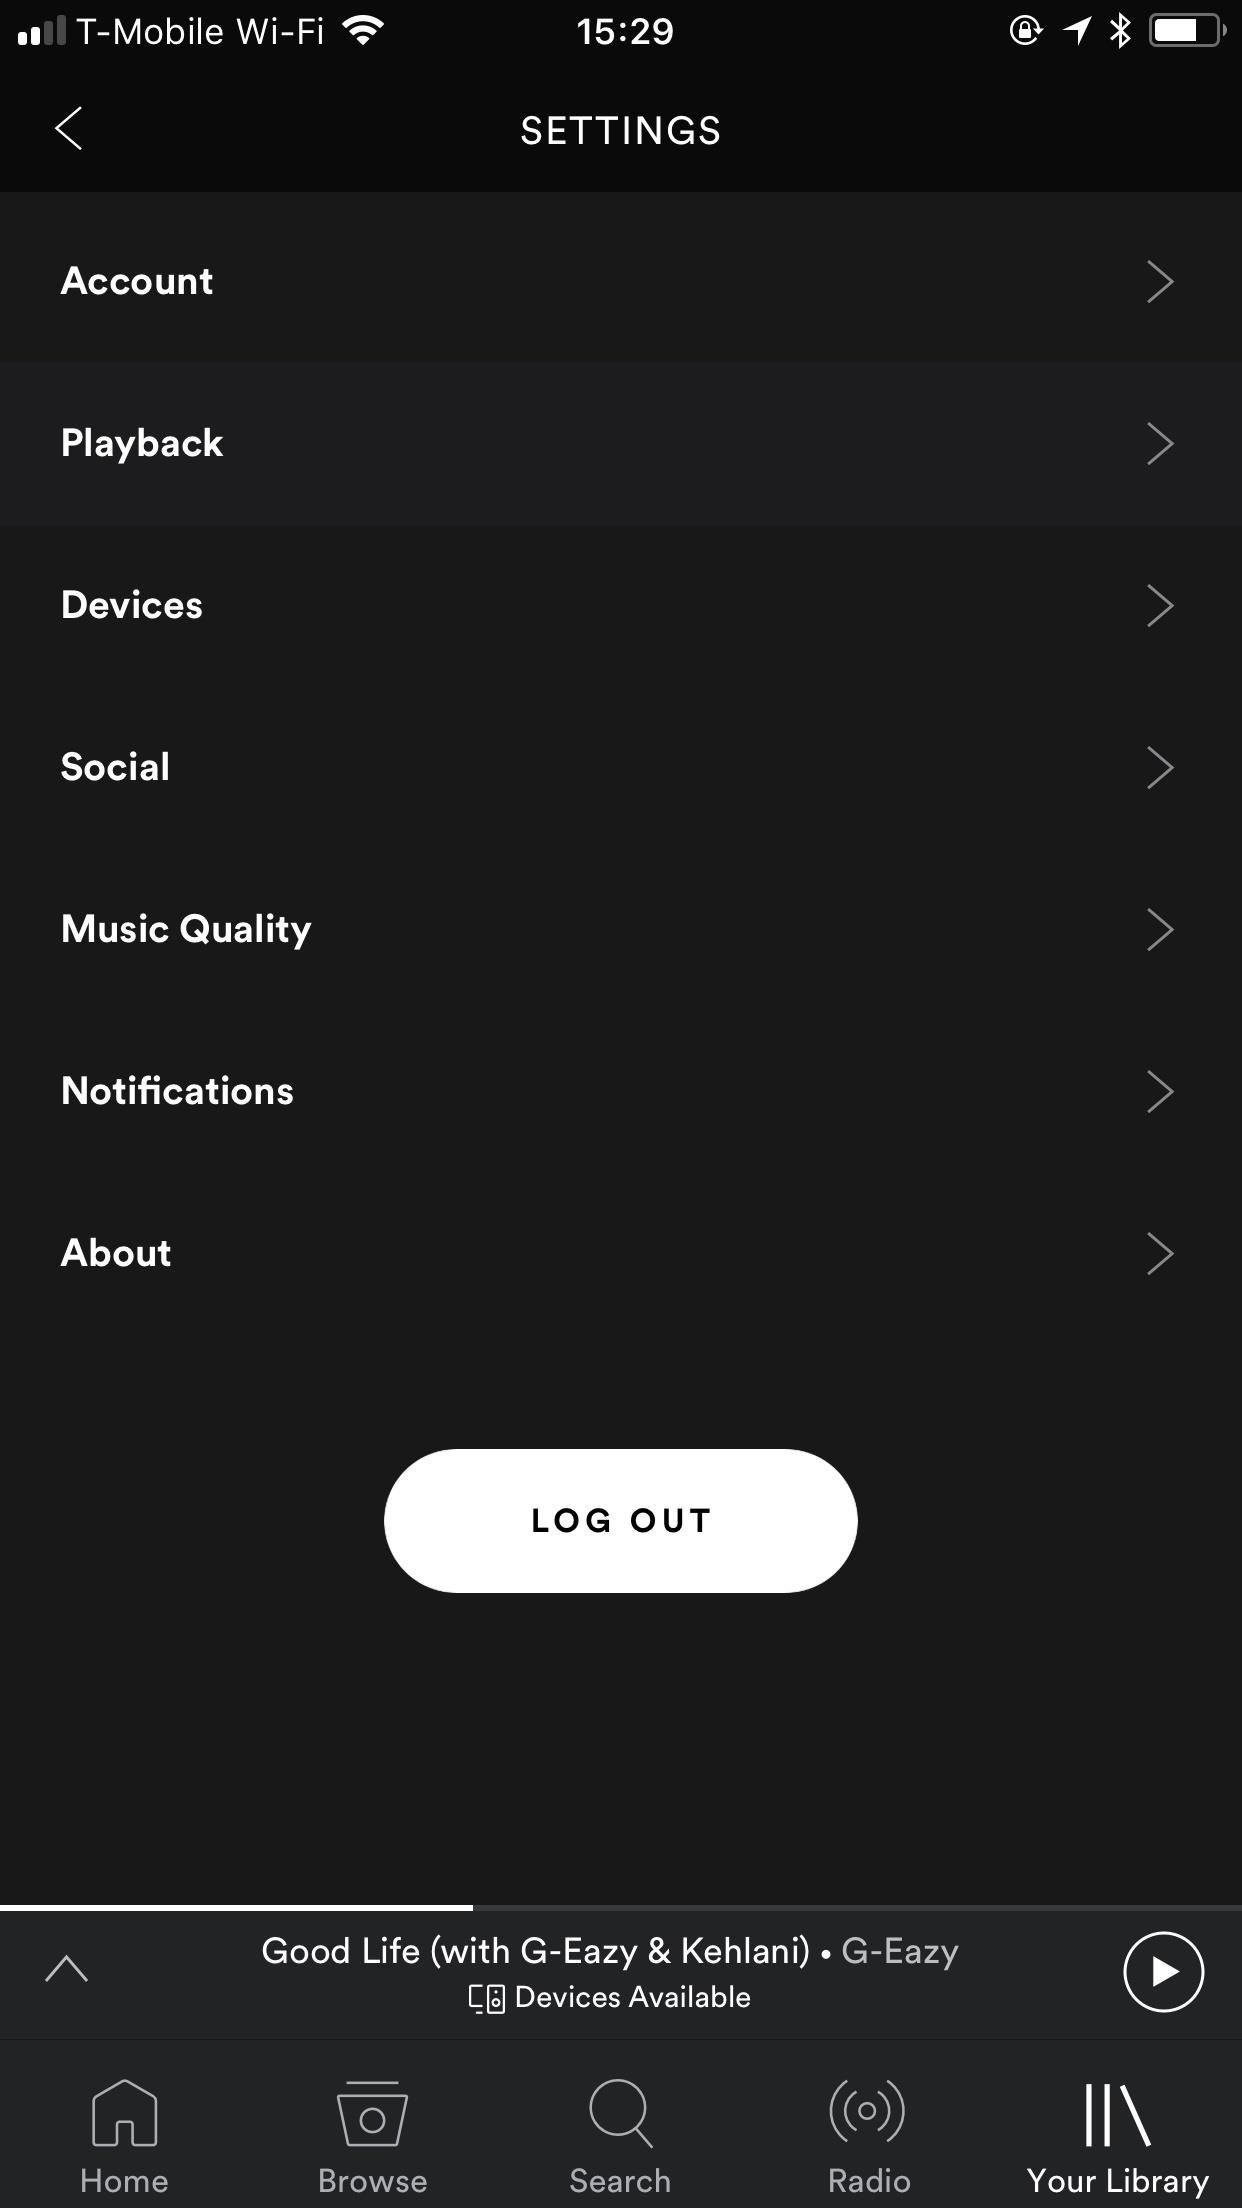 Spotify 101: How to Disable Volume Normalization